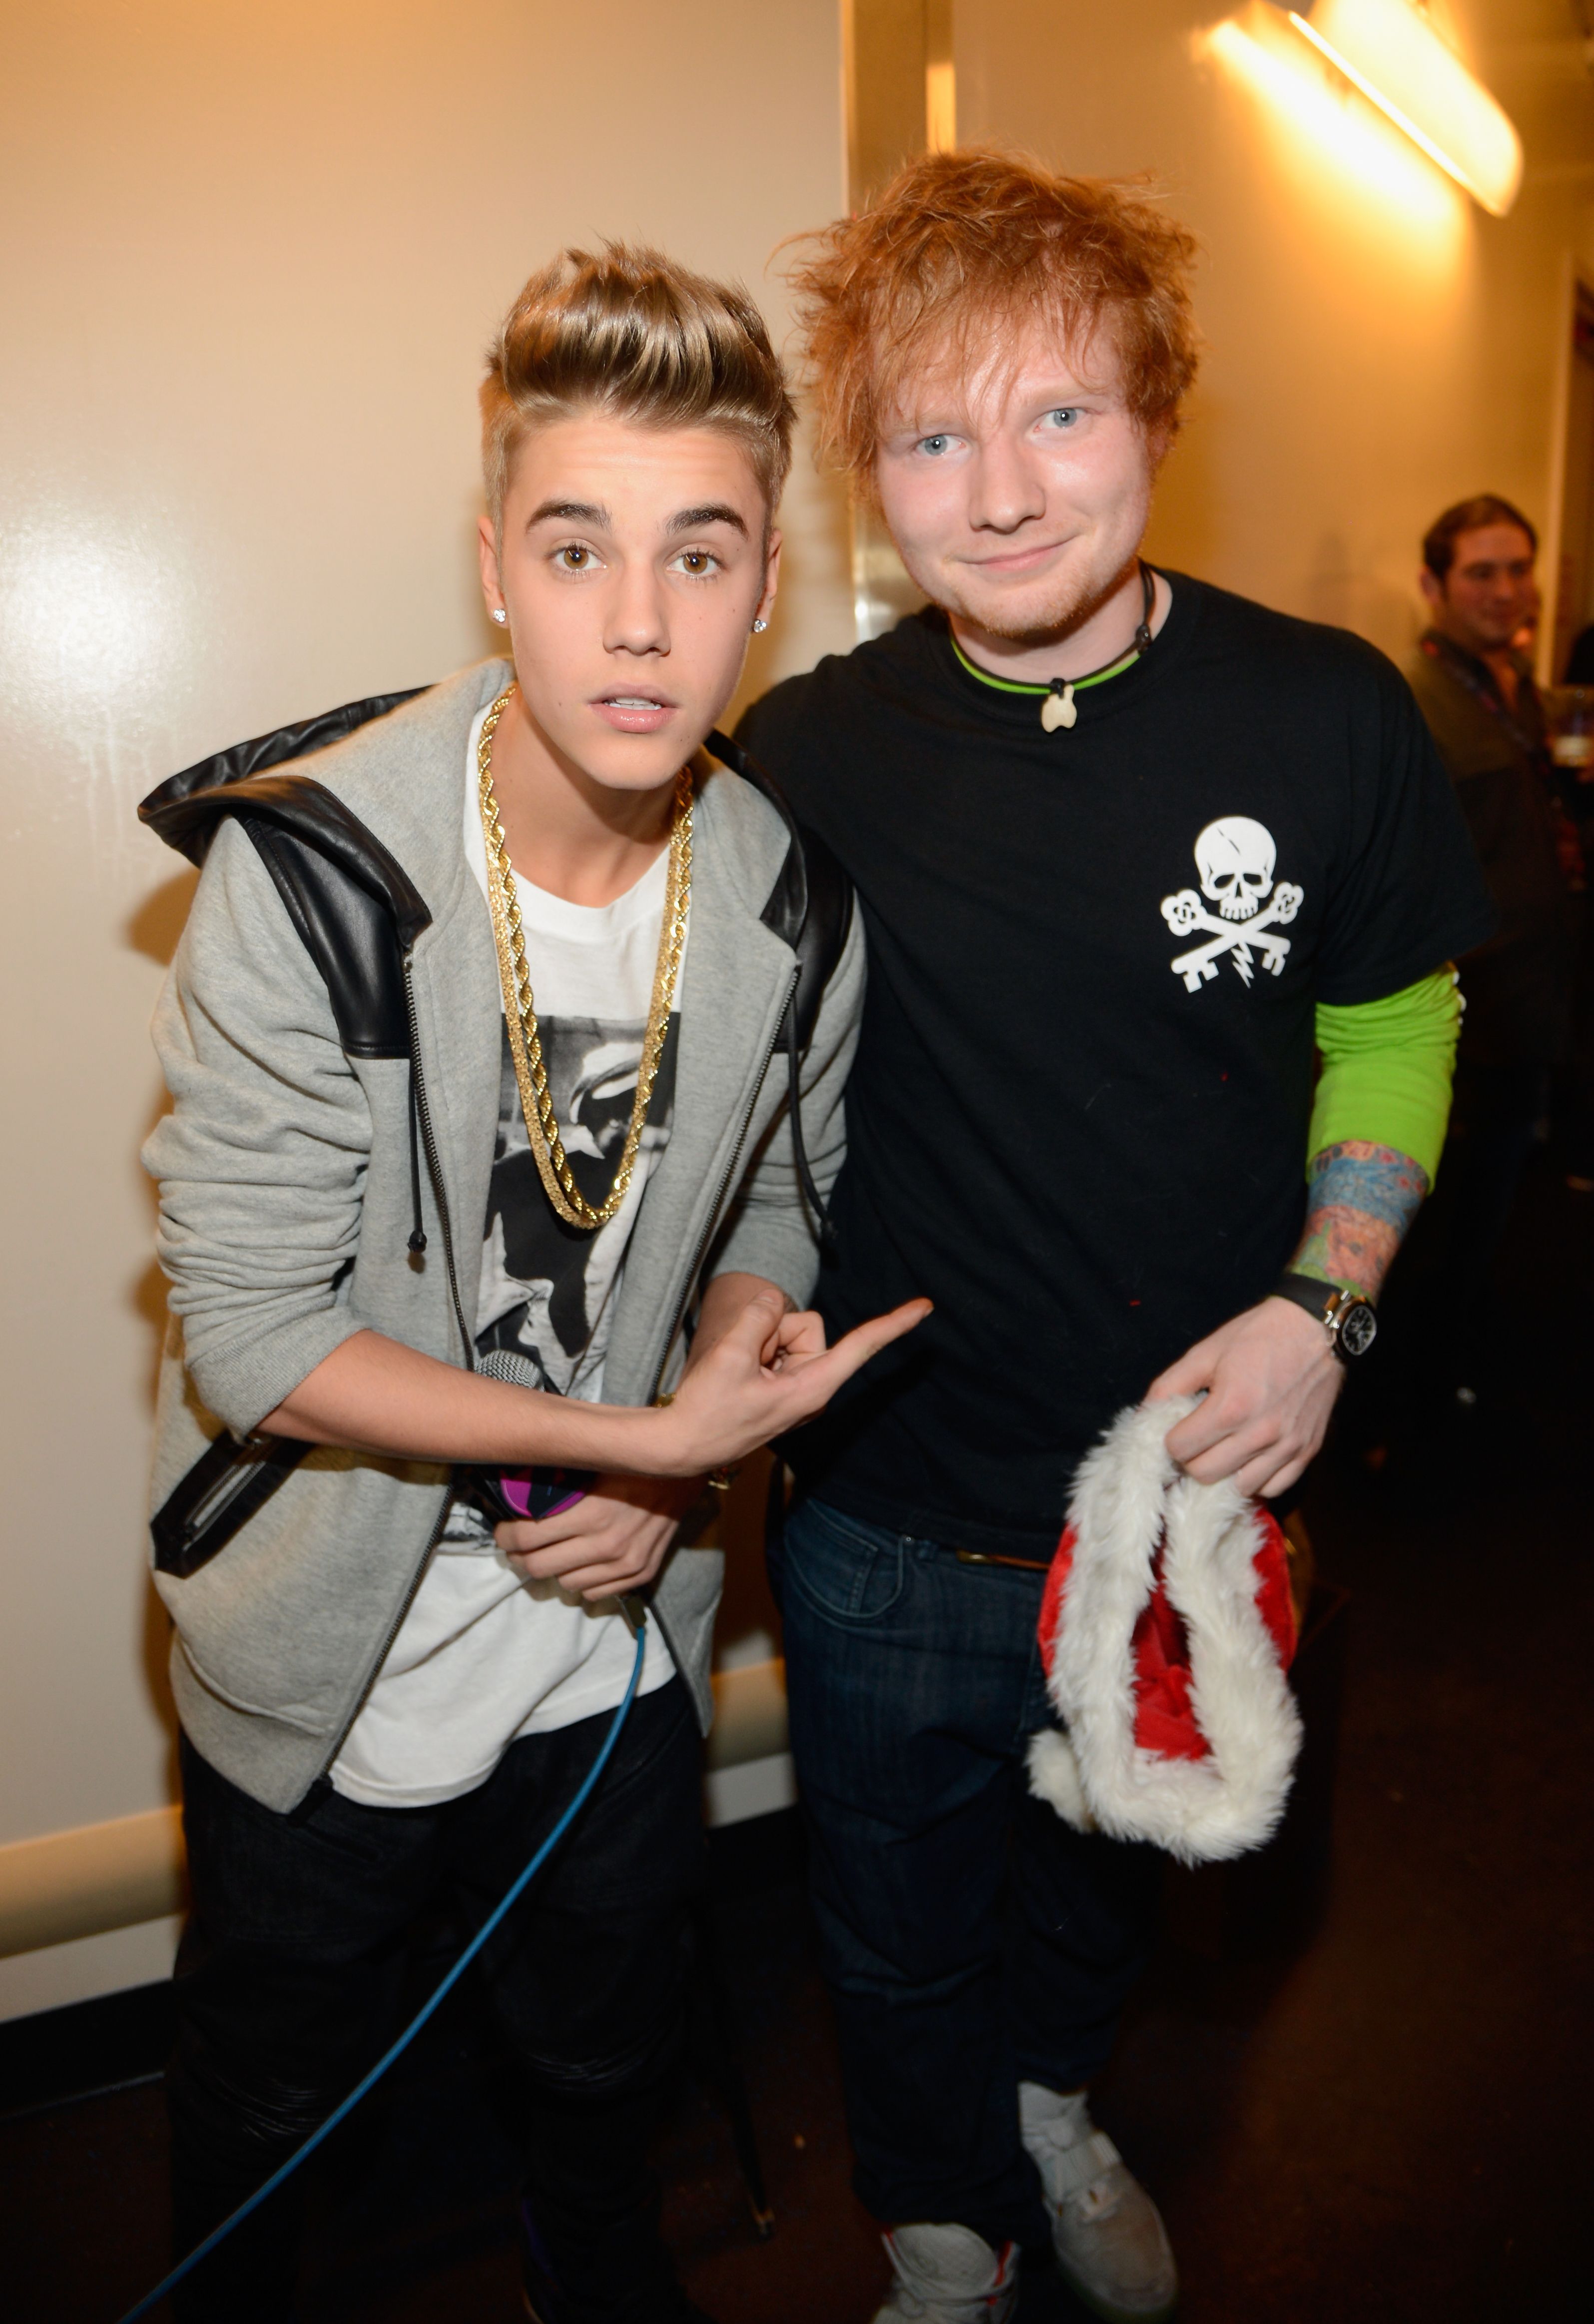 Ed Sheeran Hit Justin Bieber In The Face With A Golf Club While He Was Drunk